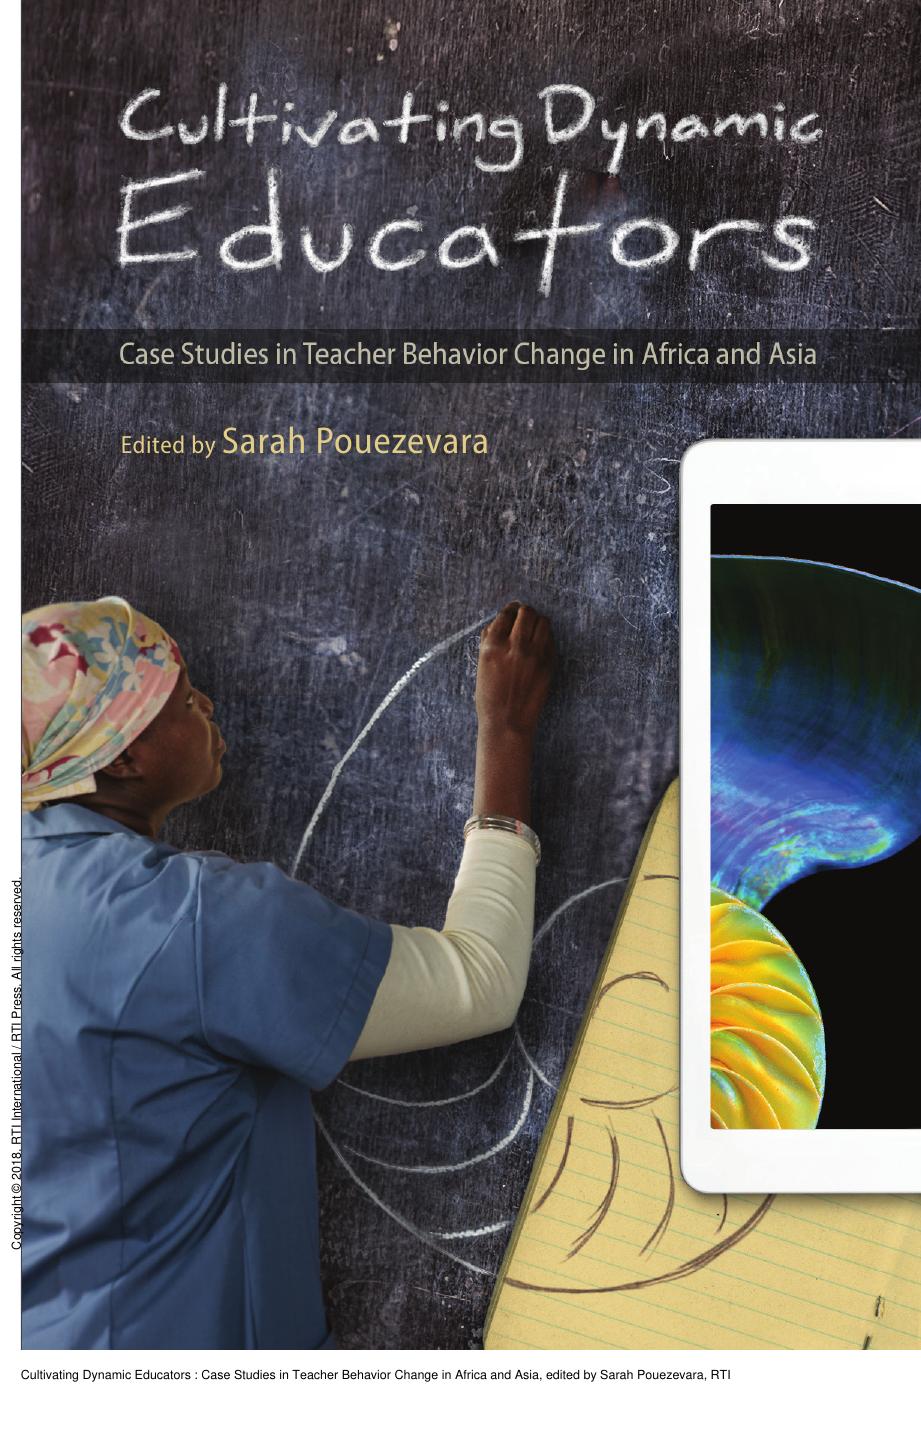 Cultivating Dynamic Educators : Case Studies in Teacher Behavior Change in Africa and Asia by Sarah Pouezevara